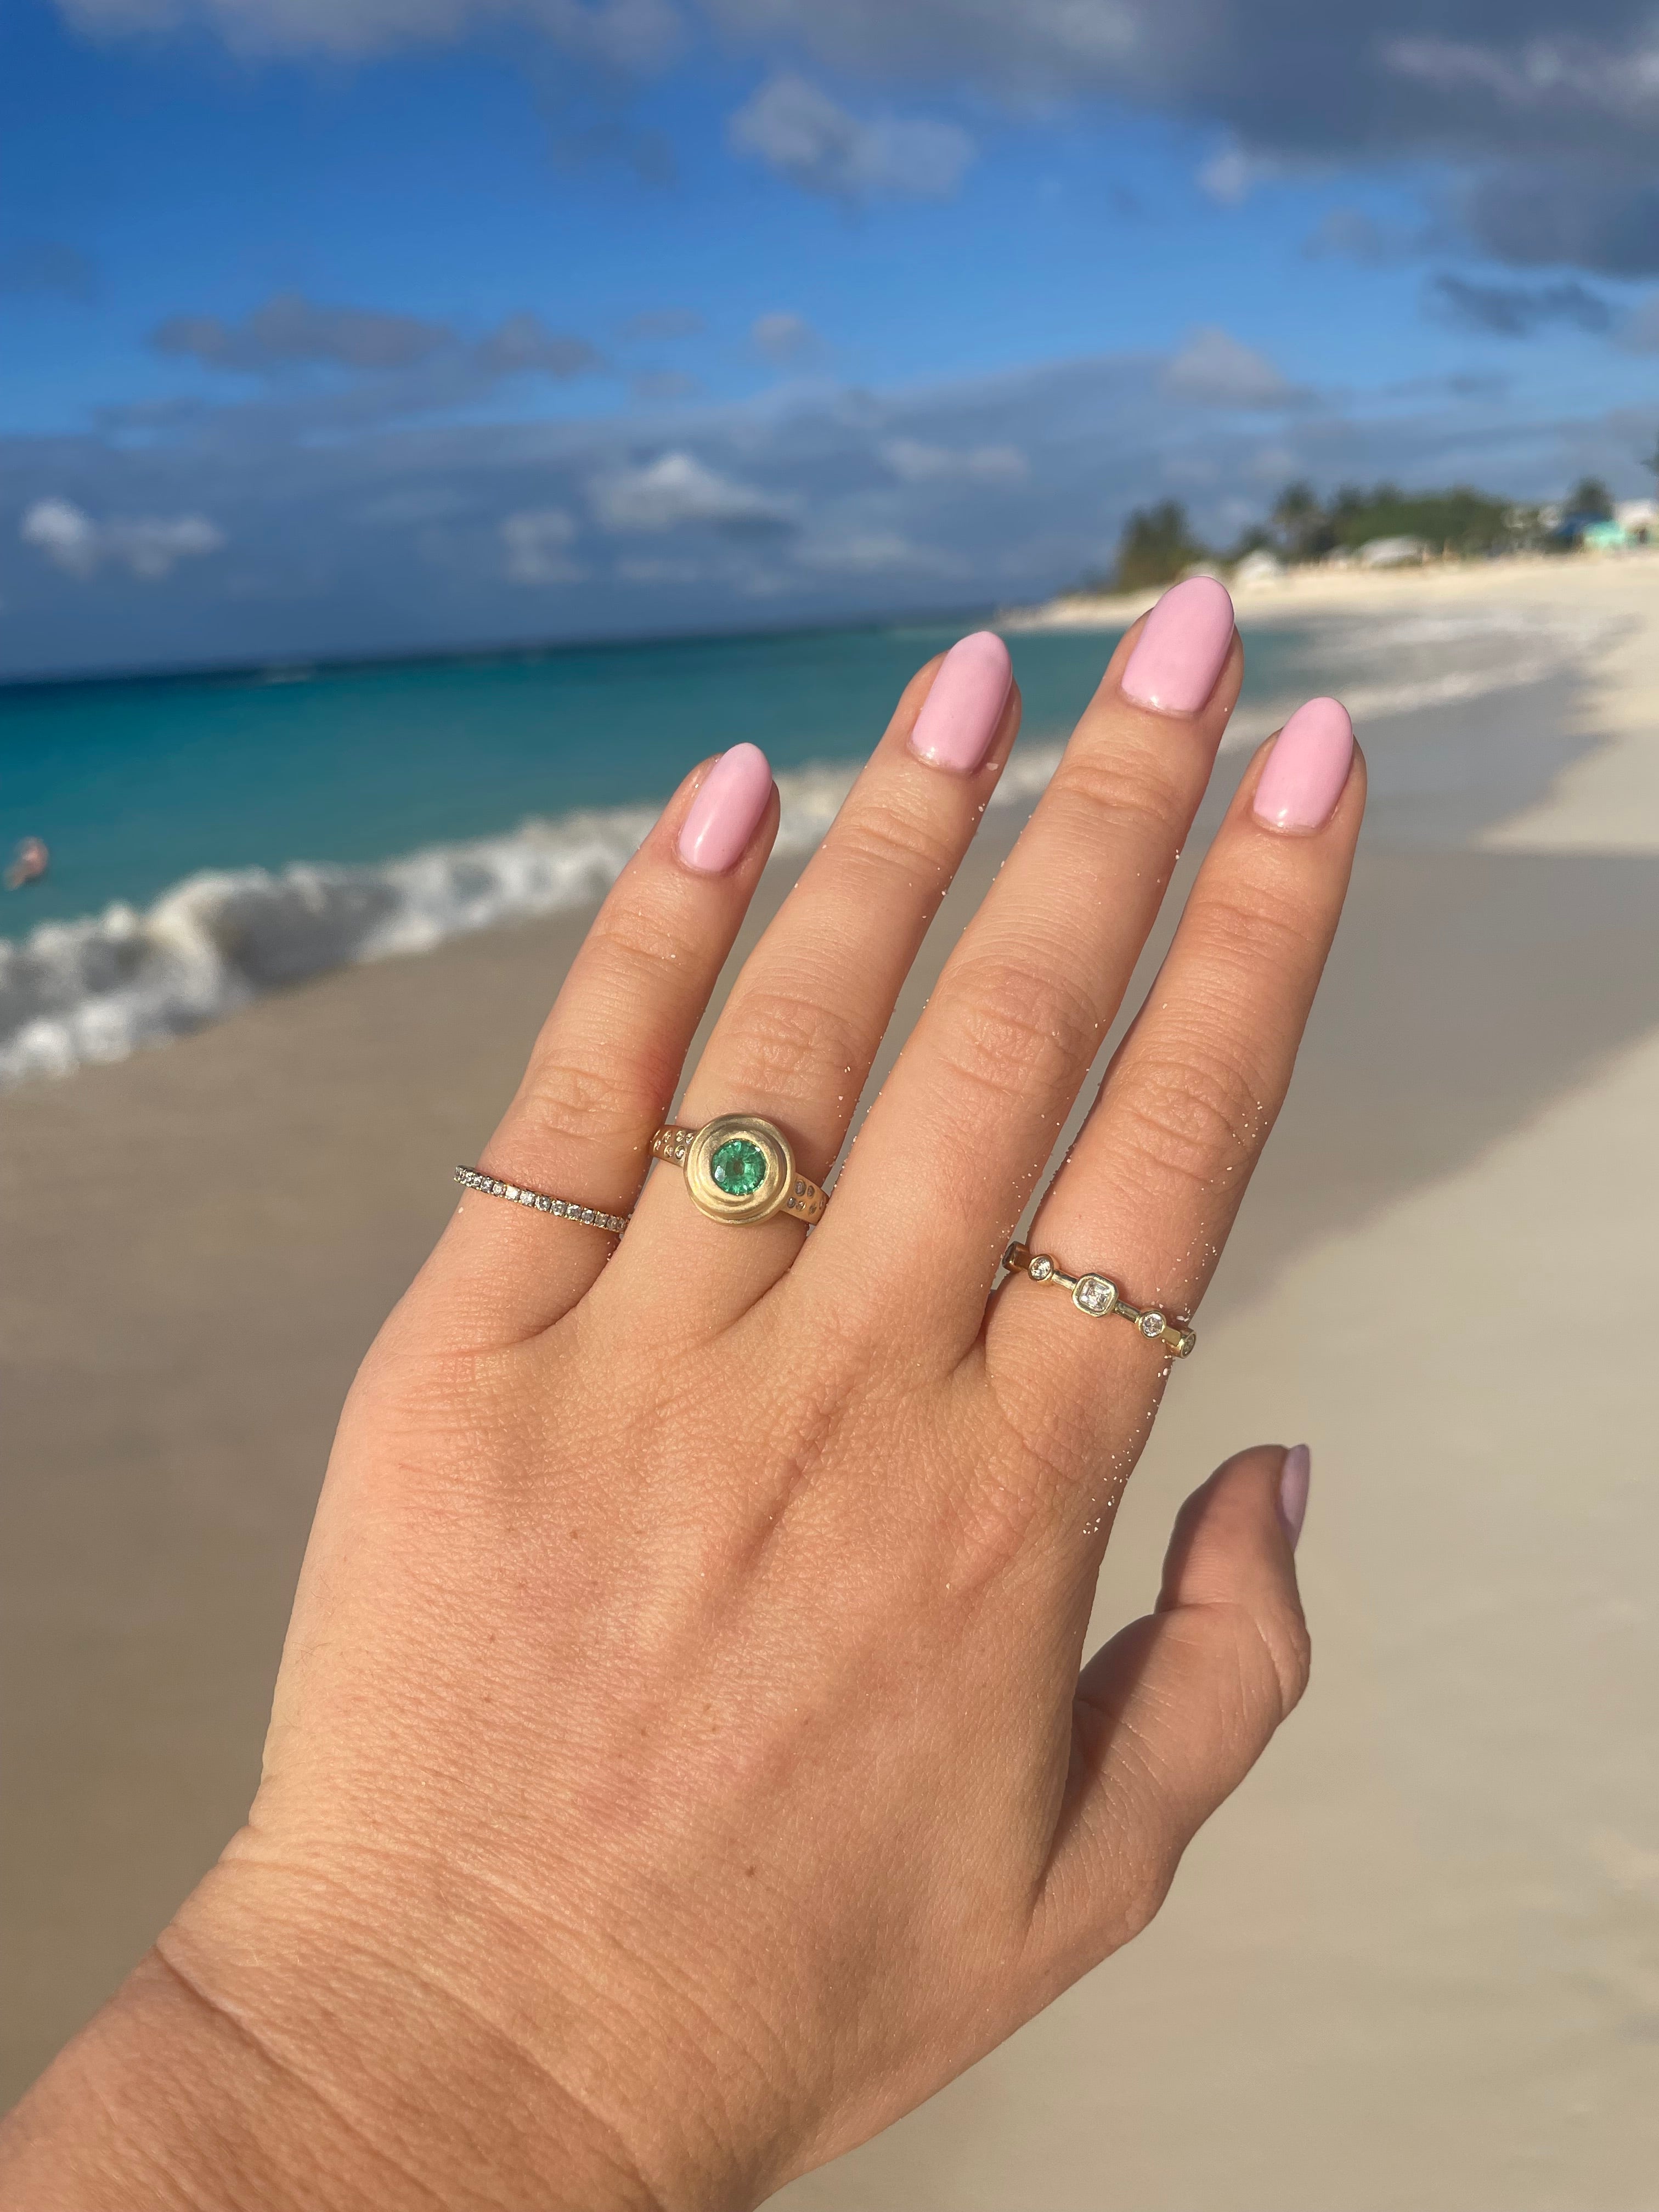 woman's hand at beach with gold, emerald and diamond rings by carter eve jewelry